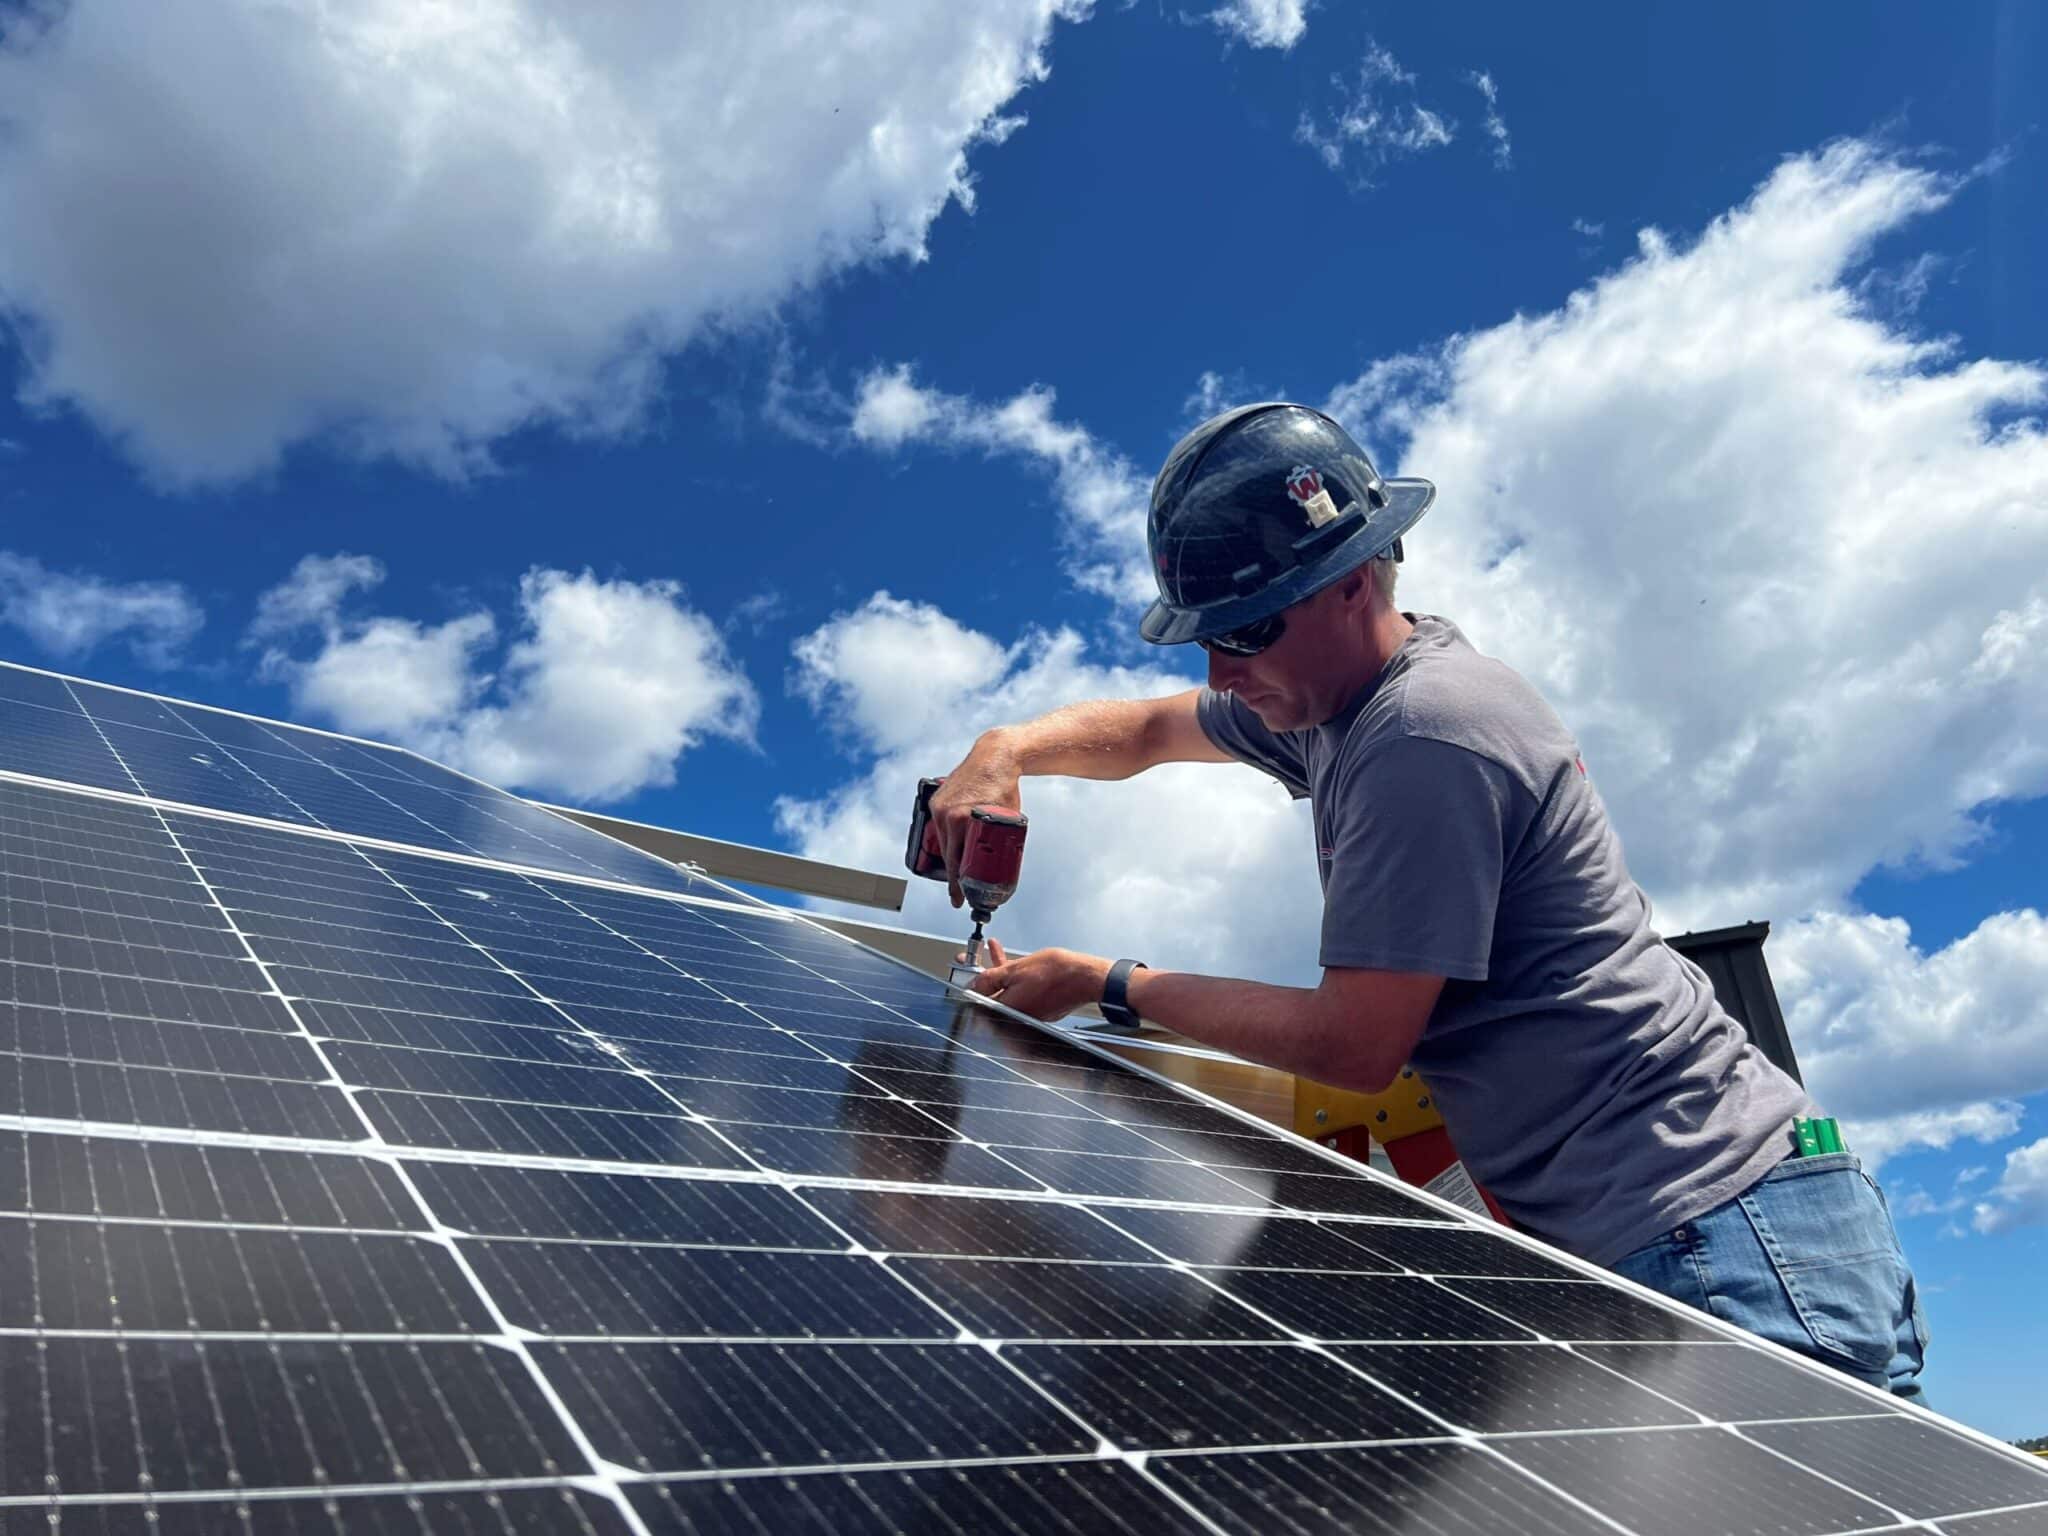 Man working on a solar array with a blue sky and clouds in the background. Solar is a great way to invest in the future.